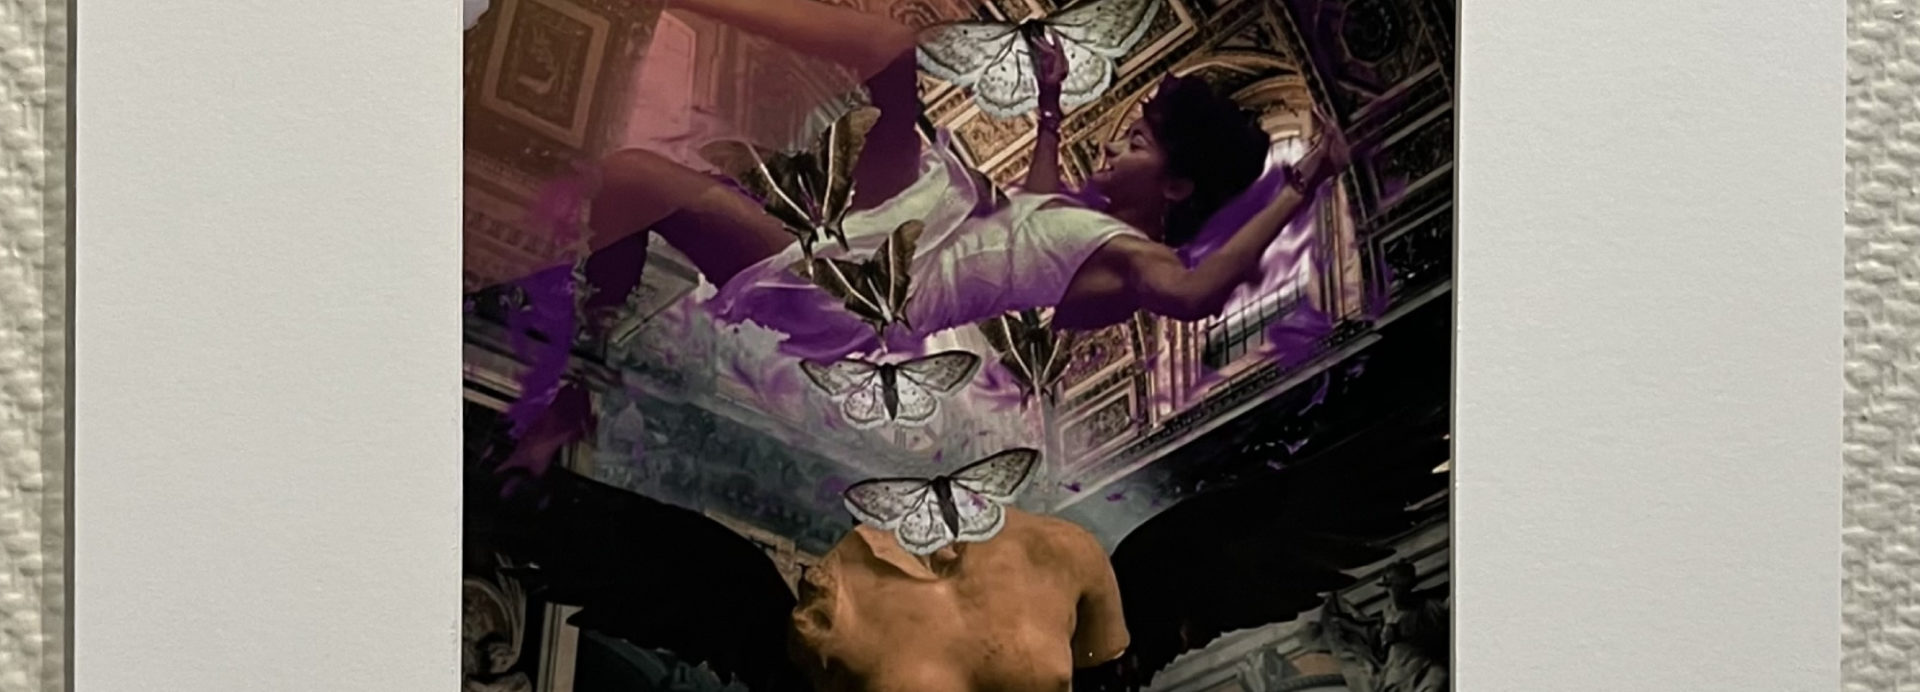 Printed collage image with the figure of a Black woman floating in air amidst purple colors and black and white butterflies inside a Gothic-looking room. The partial upper torso of a headless bust is also visible.